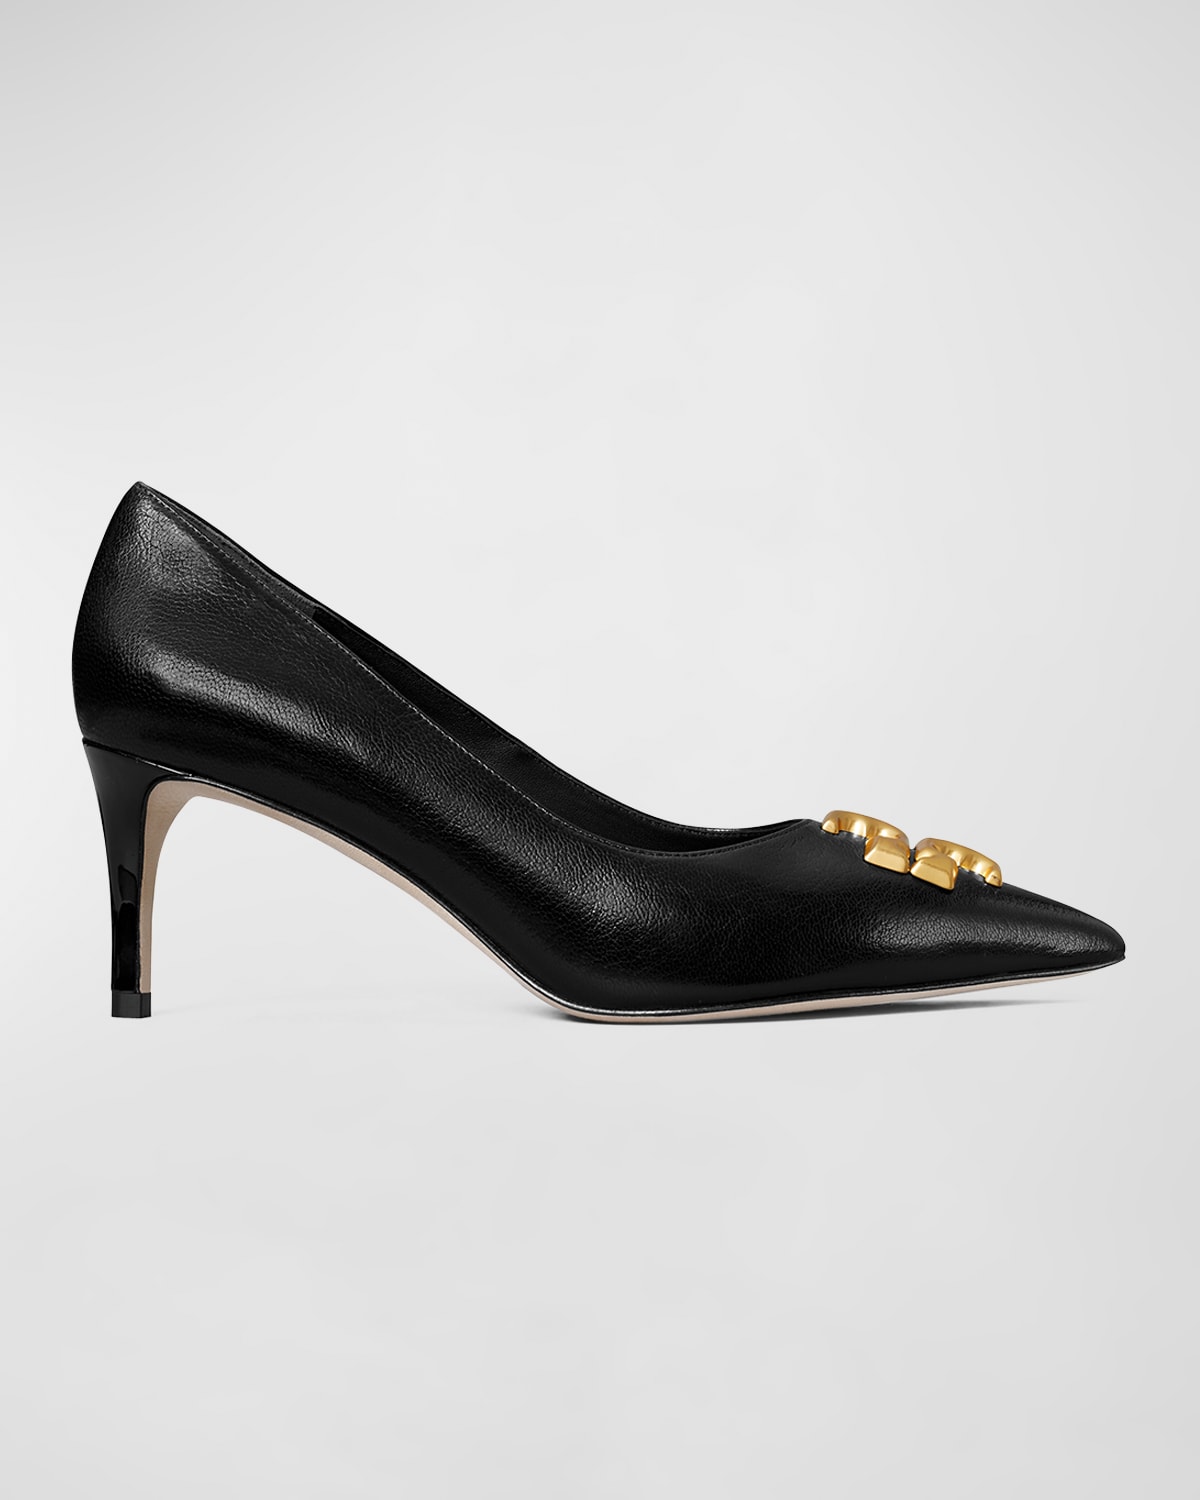 TORY BURCH ELEANOR LEATHER MEDALLION PUMPS